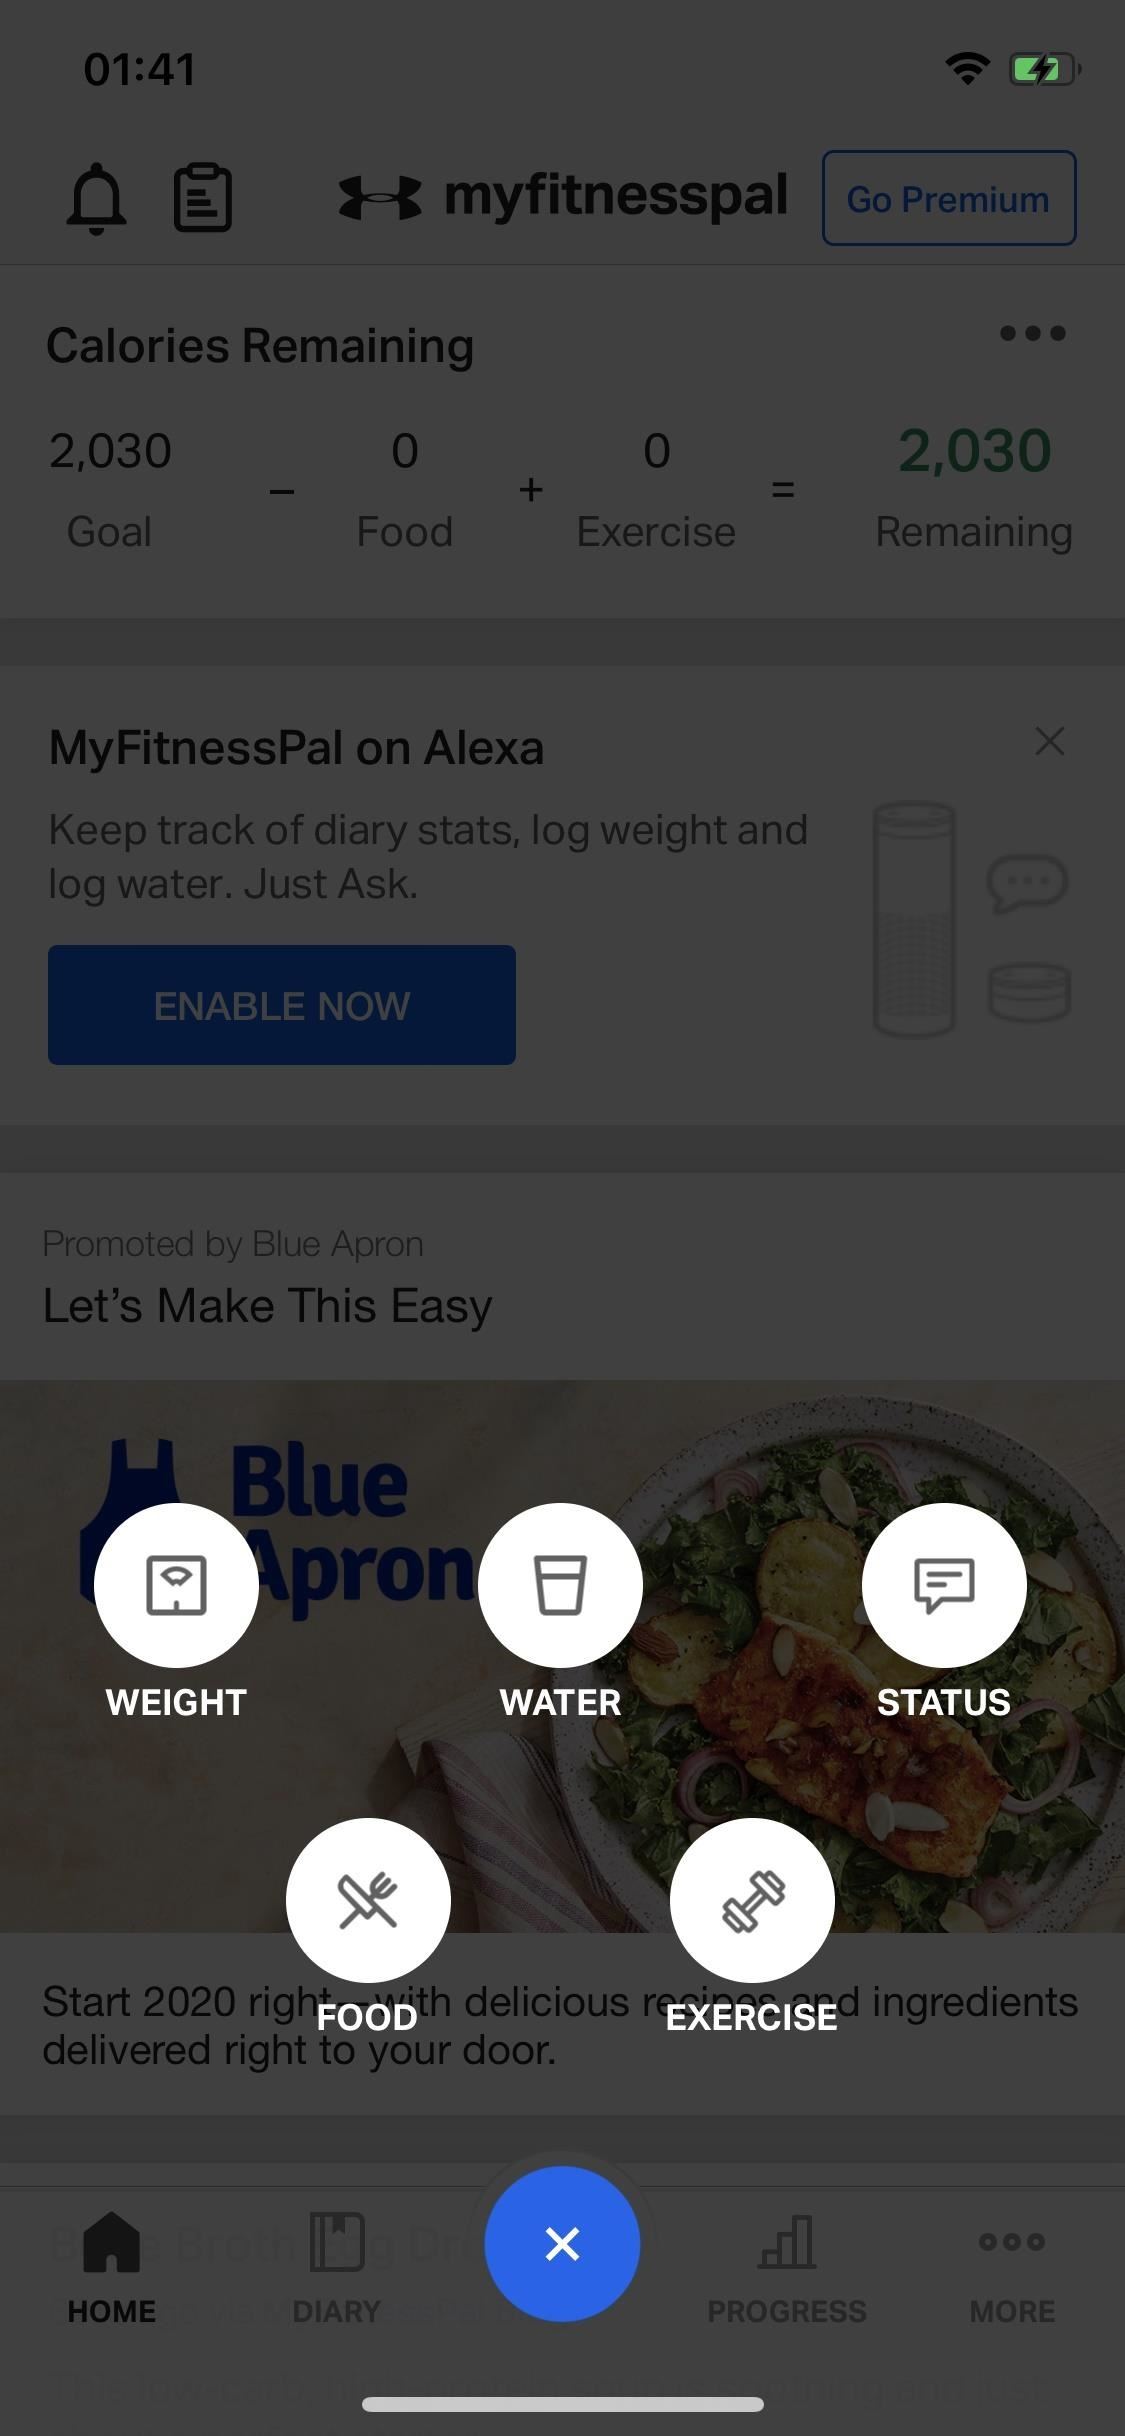 MyFitnessPal Has a Hidden Way to See How Much Weight Your Diet Will Help You Lose